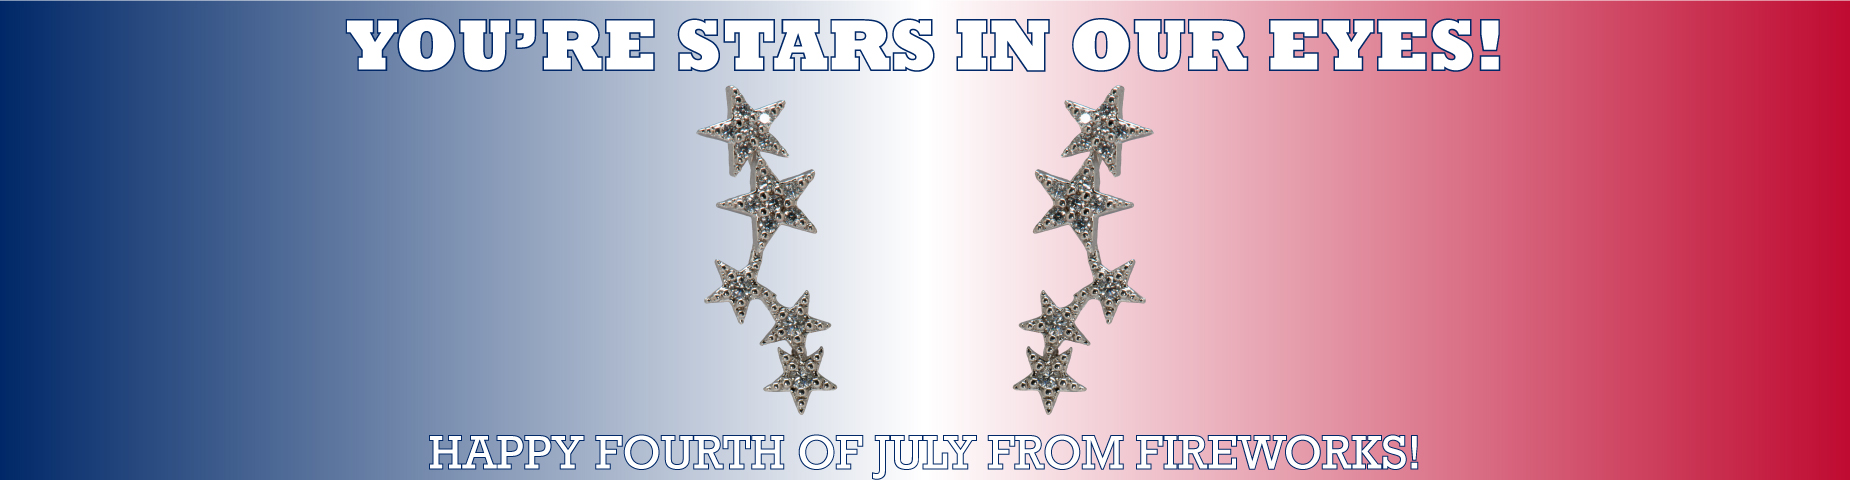 YOU'RE STARS IN OUR EYES! Happy Fourth of July from Fireworks